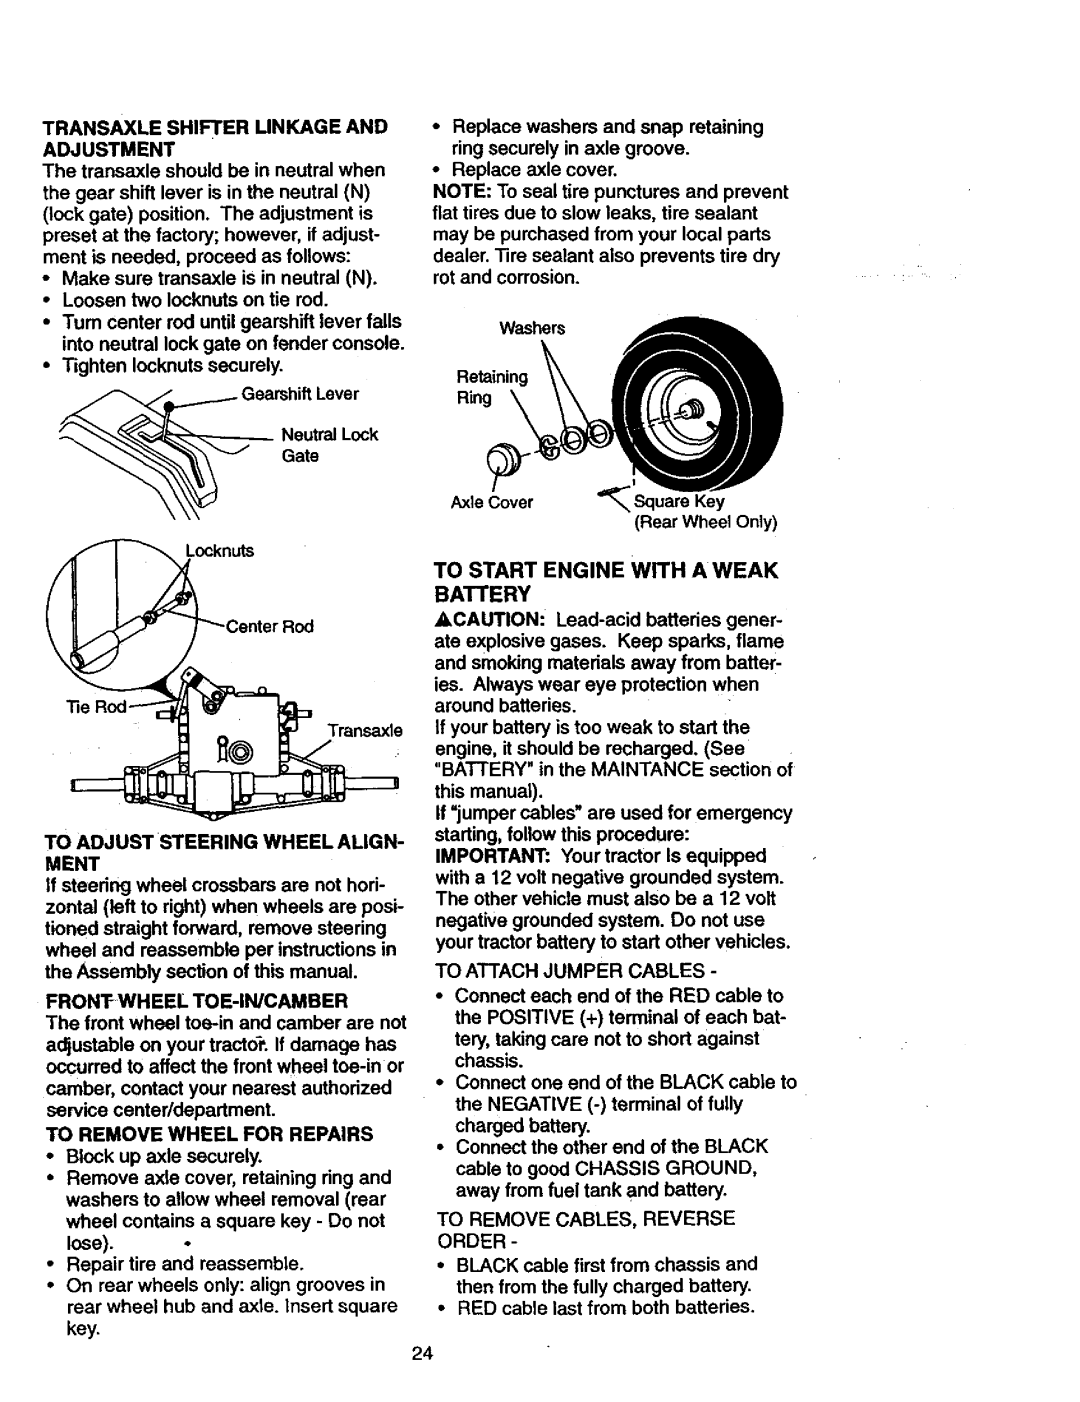 Craftsman 917.27077 manual To Start Engine With A Weak Battery, To Adjust Steering Wheel Align, Ment 